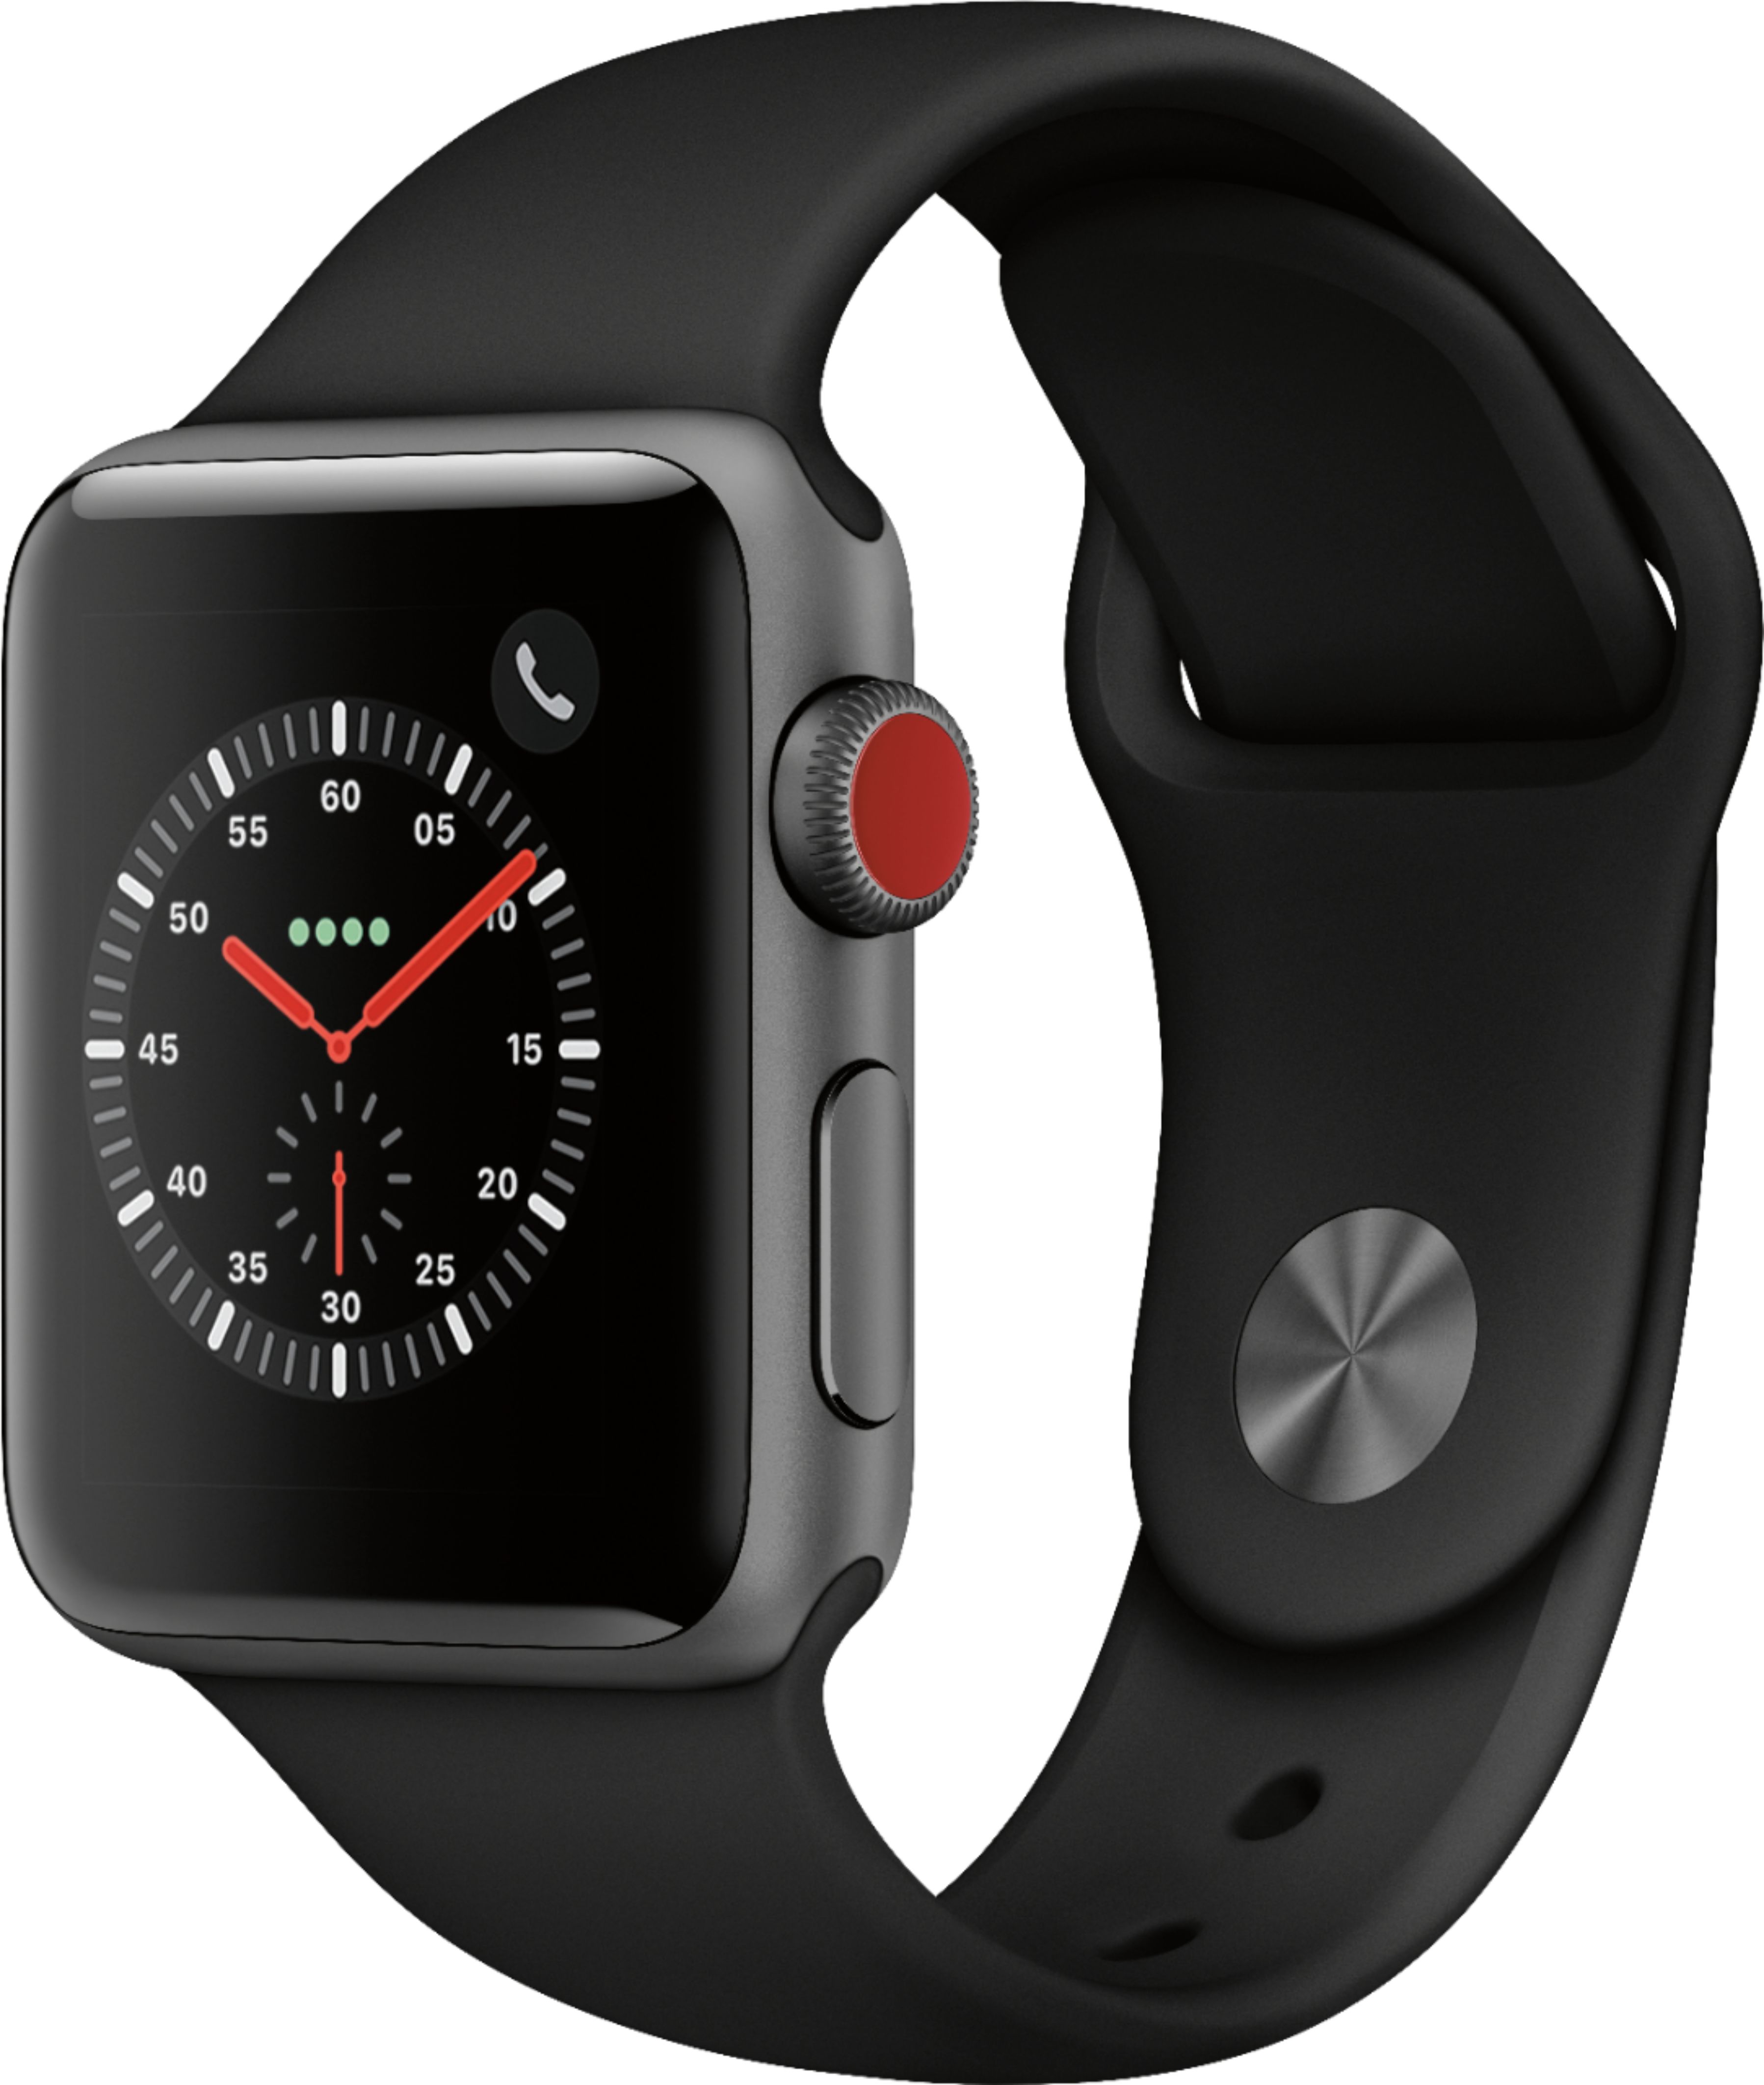 GSRF Apple Watch Series 3 (GPS+Cellular) 38mm Space Gray Aluminum Case with Black Sport Band - Space Gray Aluminum